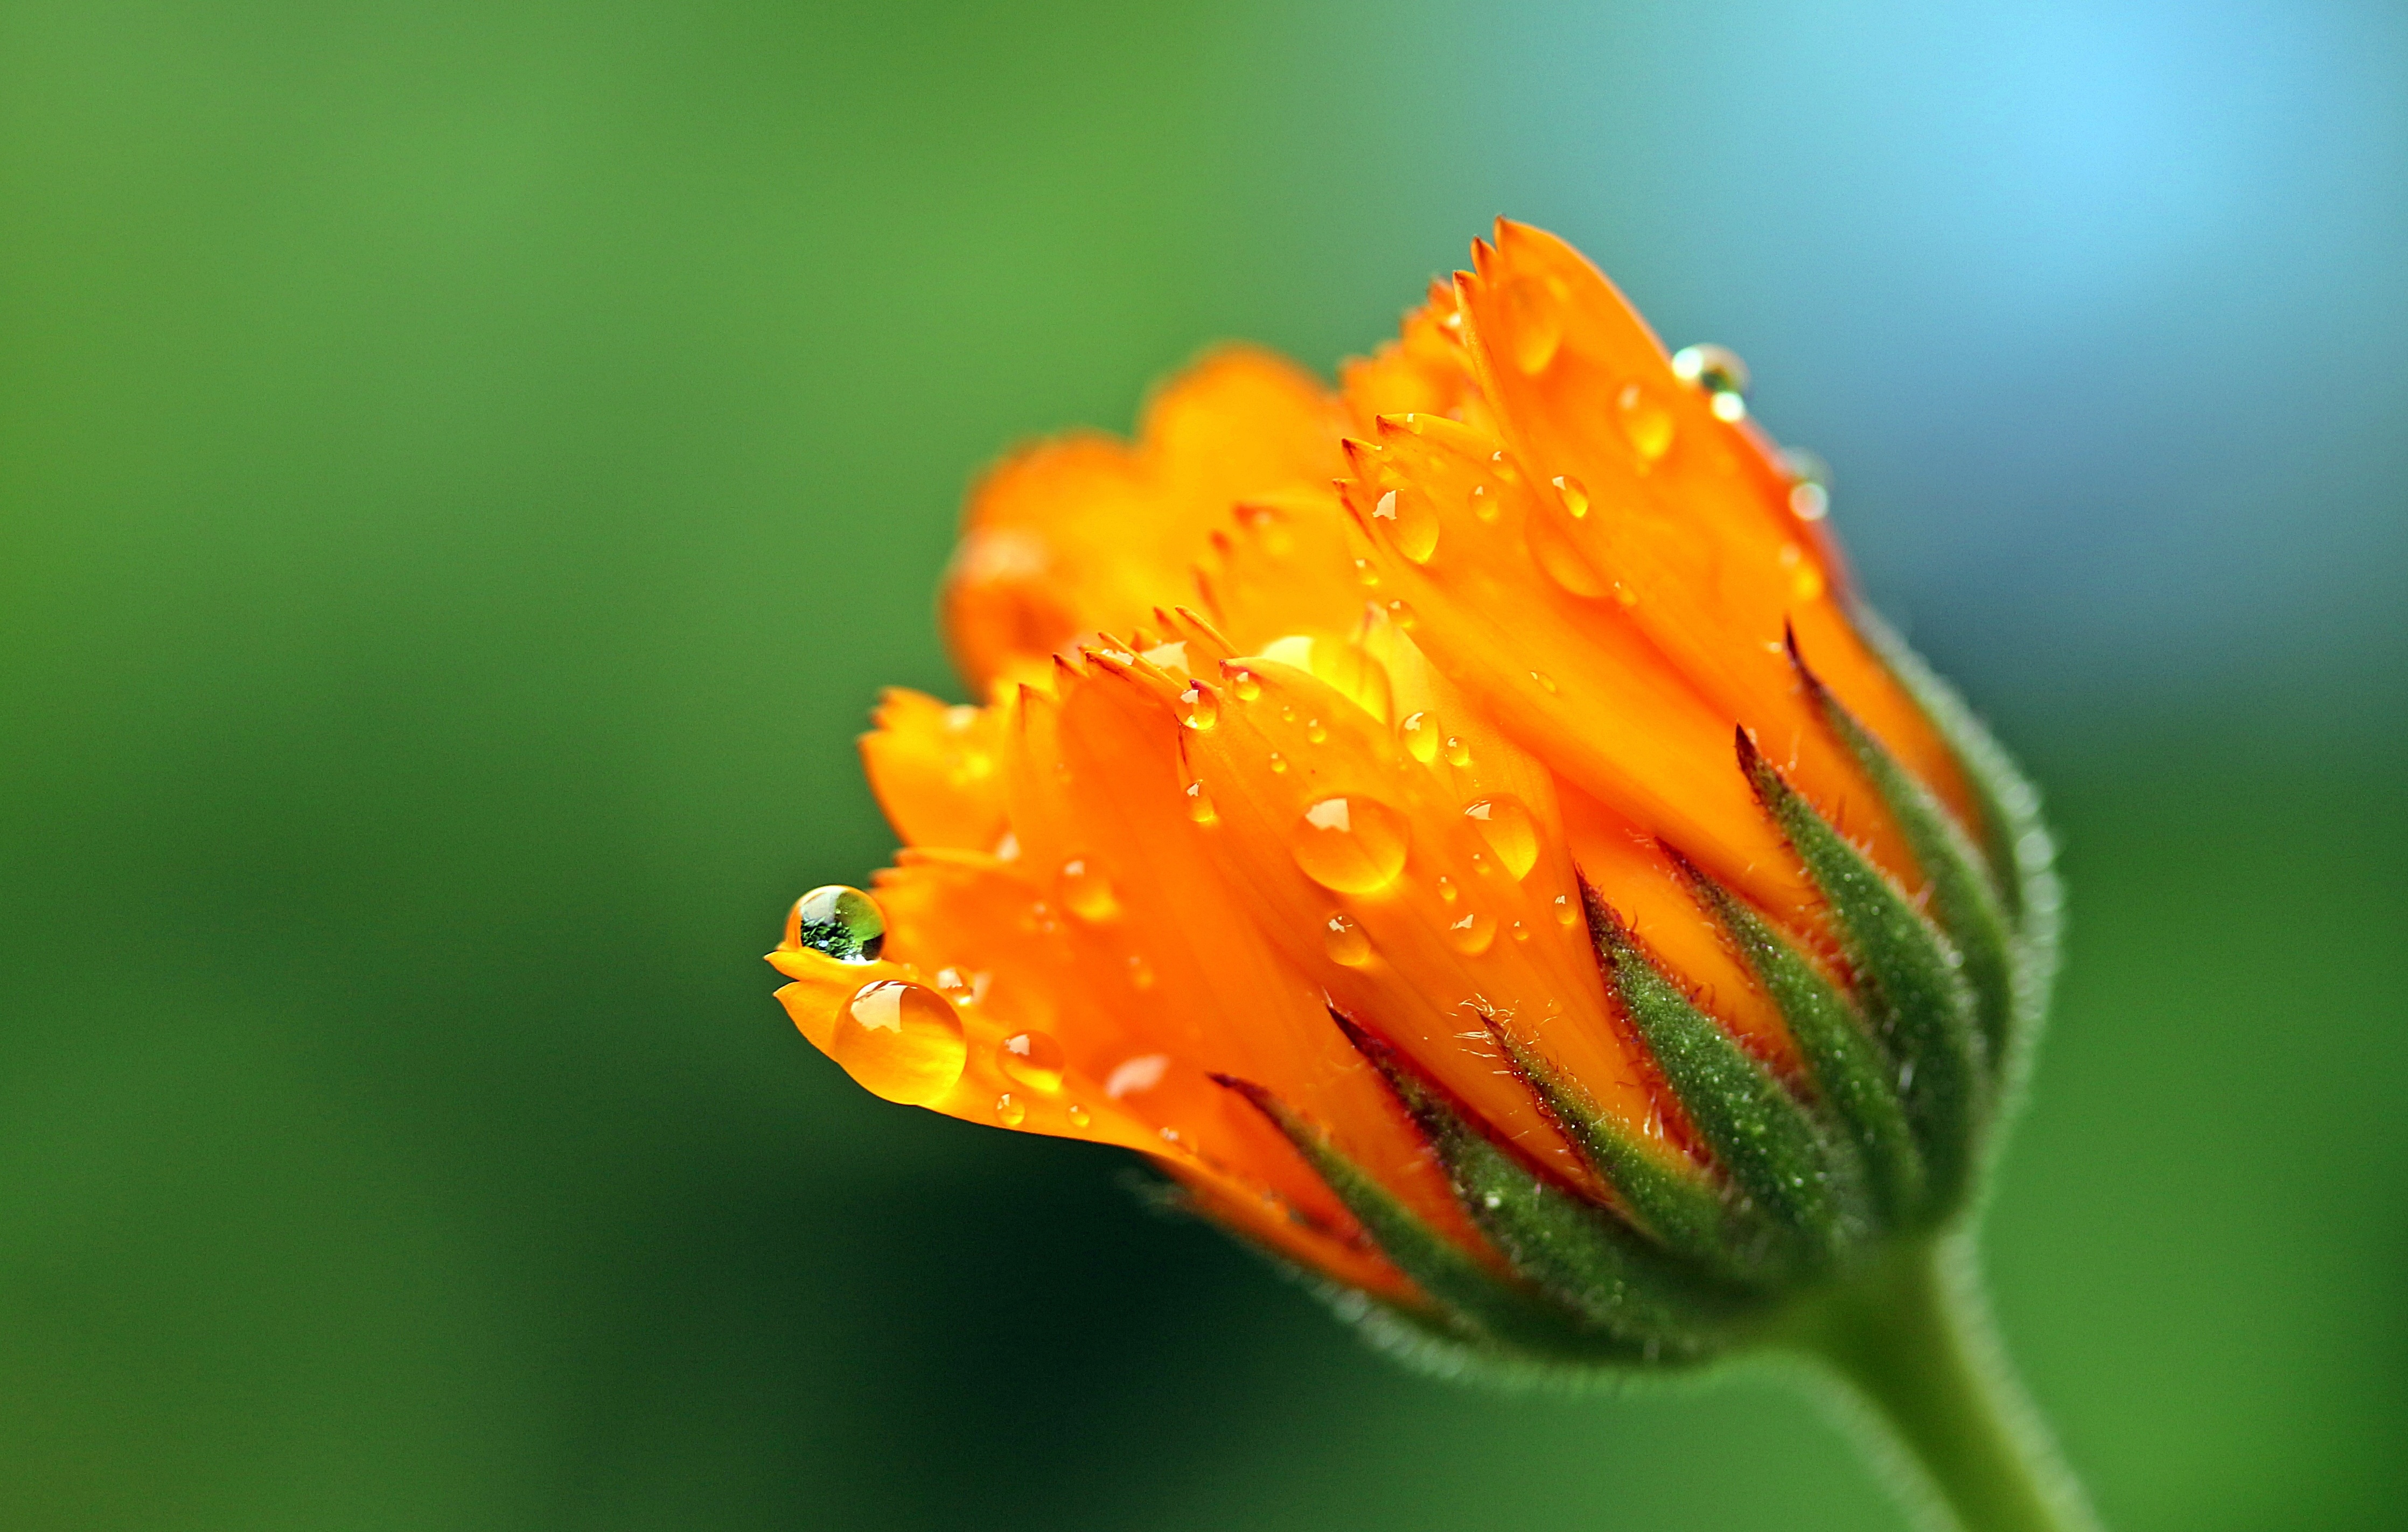 Calendula Flower Bud In The Drops Of Dew On A Green Background Wallpapers And Images Wallpapers Pictures Photos